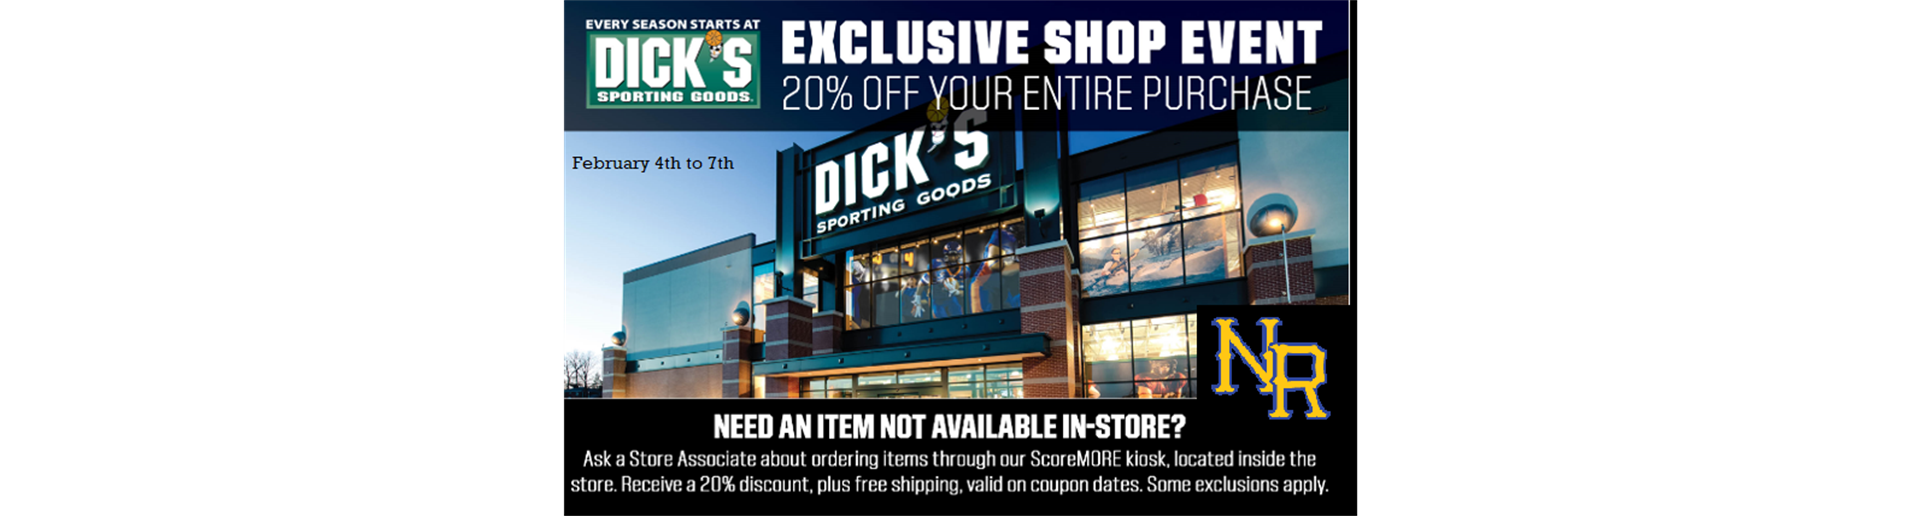 Dick's Sporting Goods 20%off Shopping Event